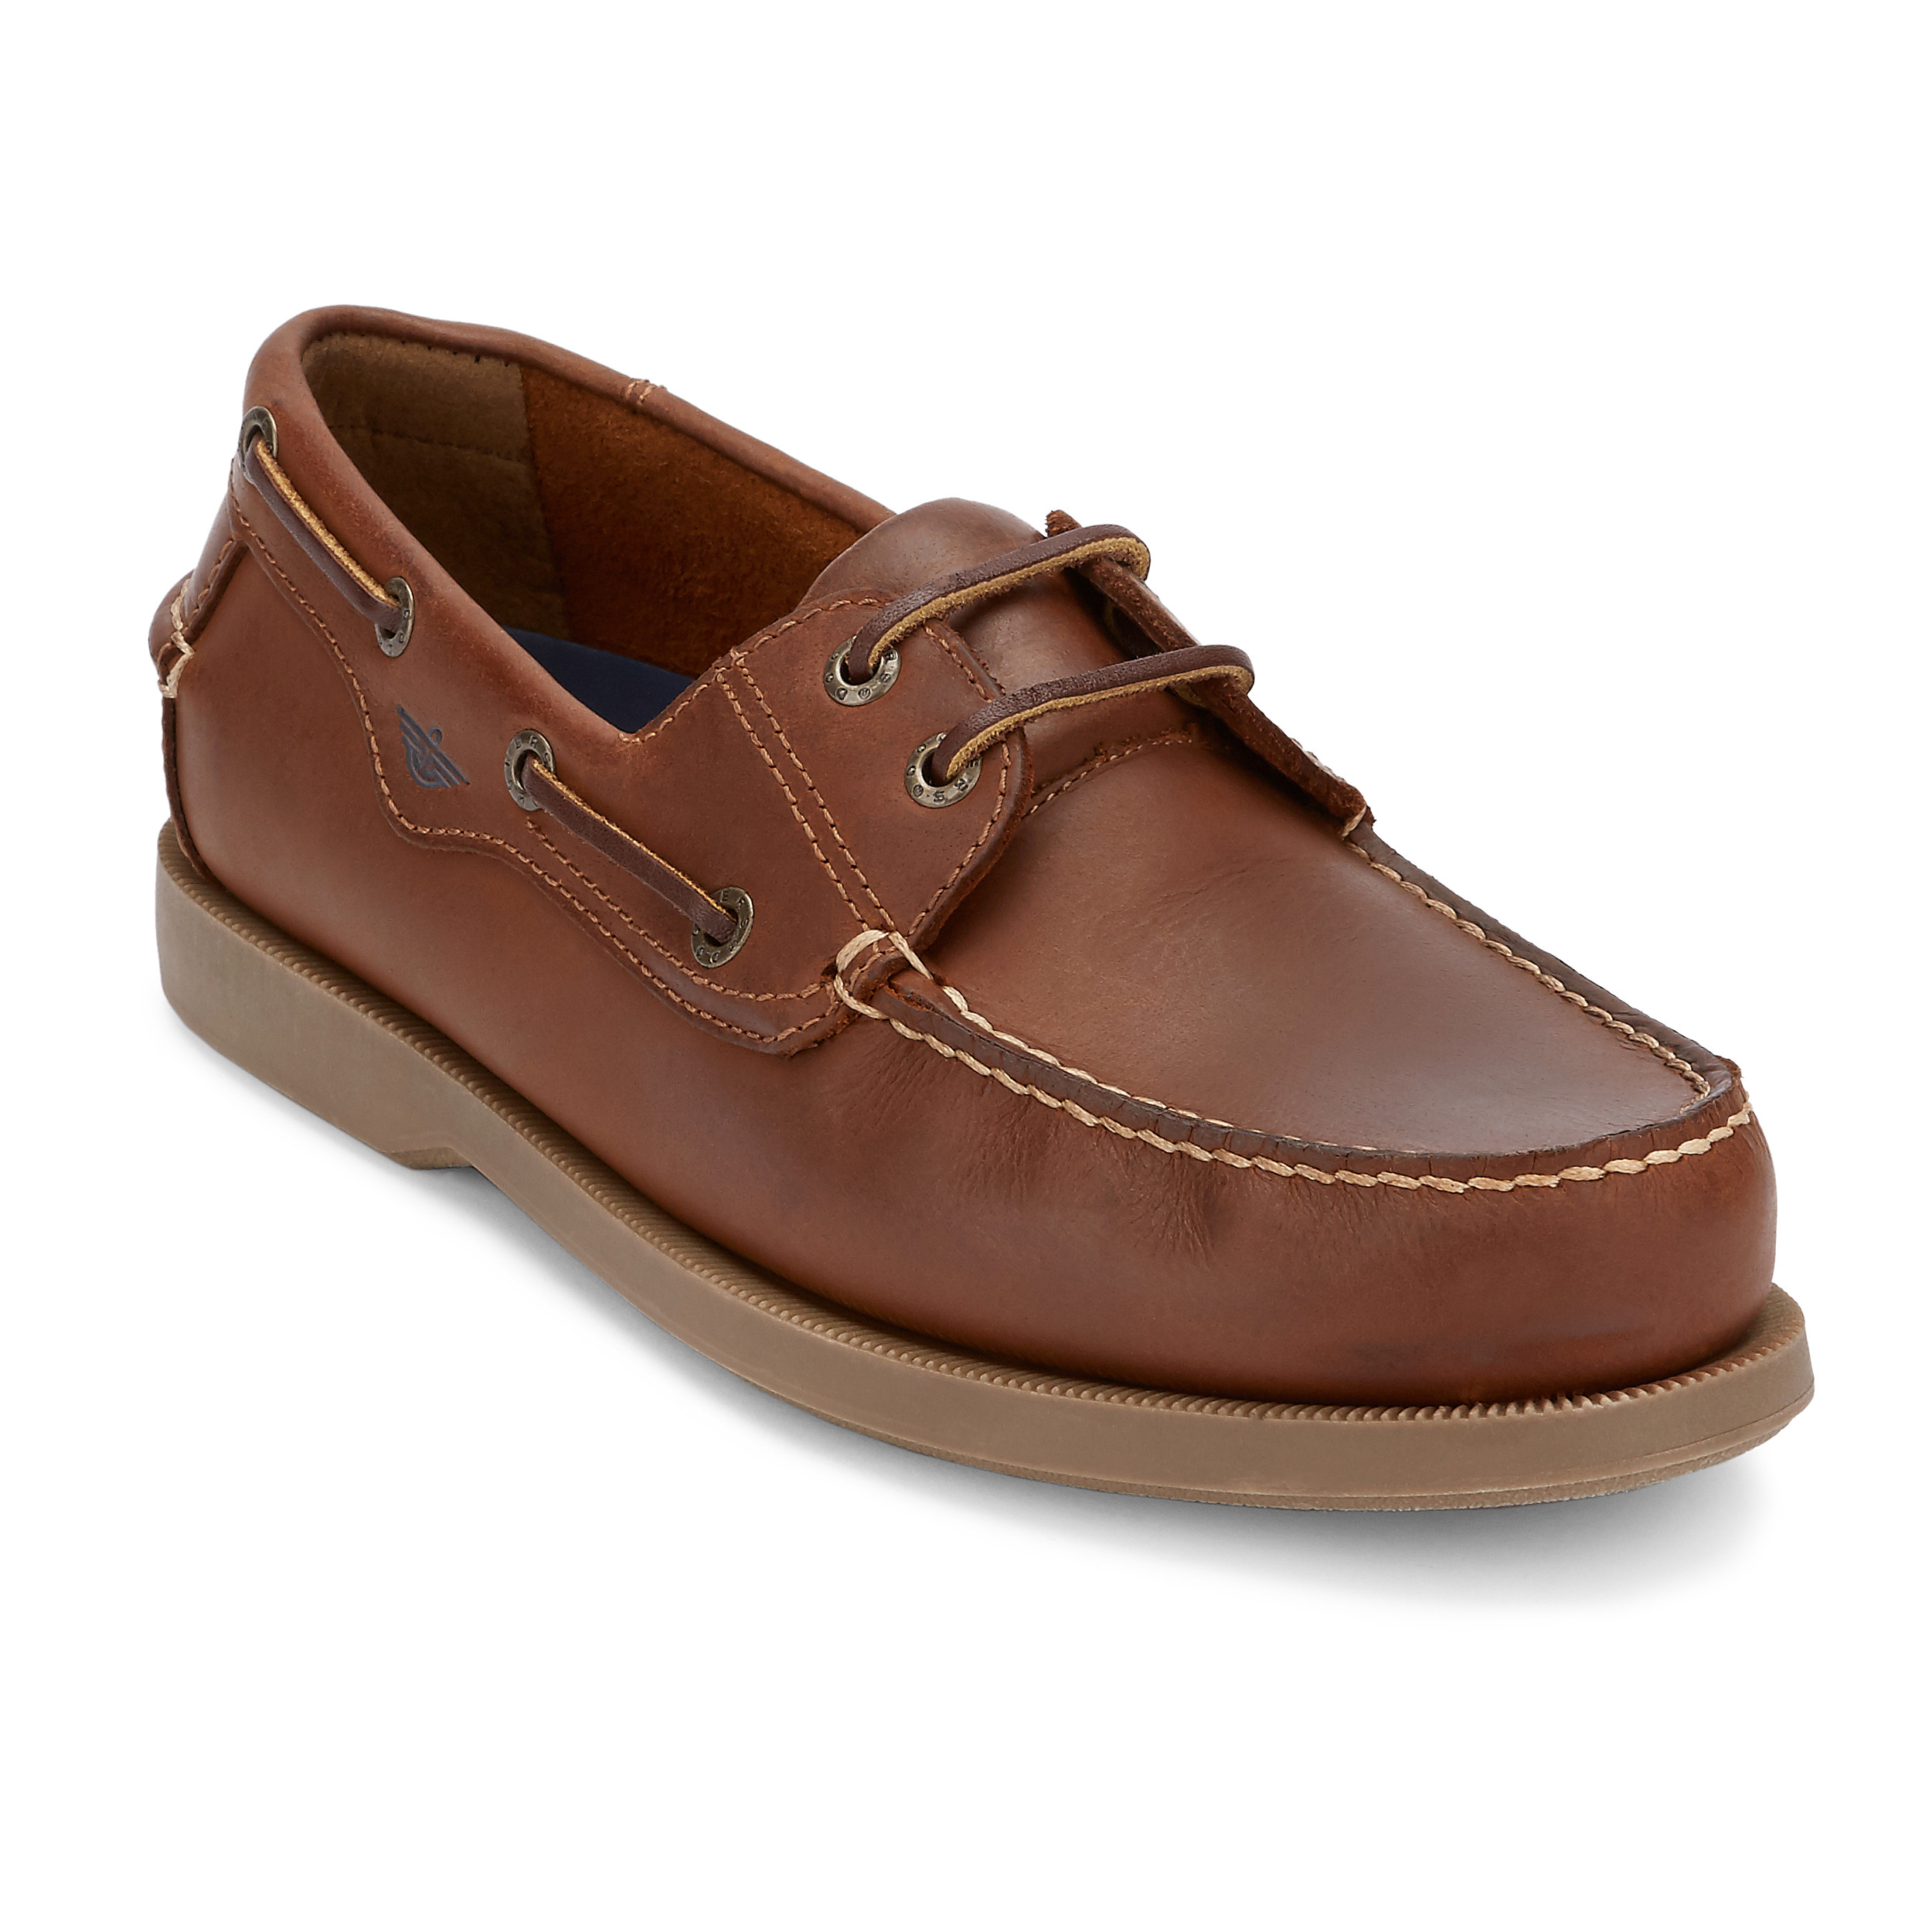 yacht boat shoes